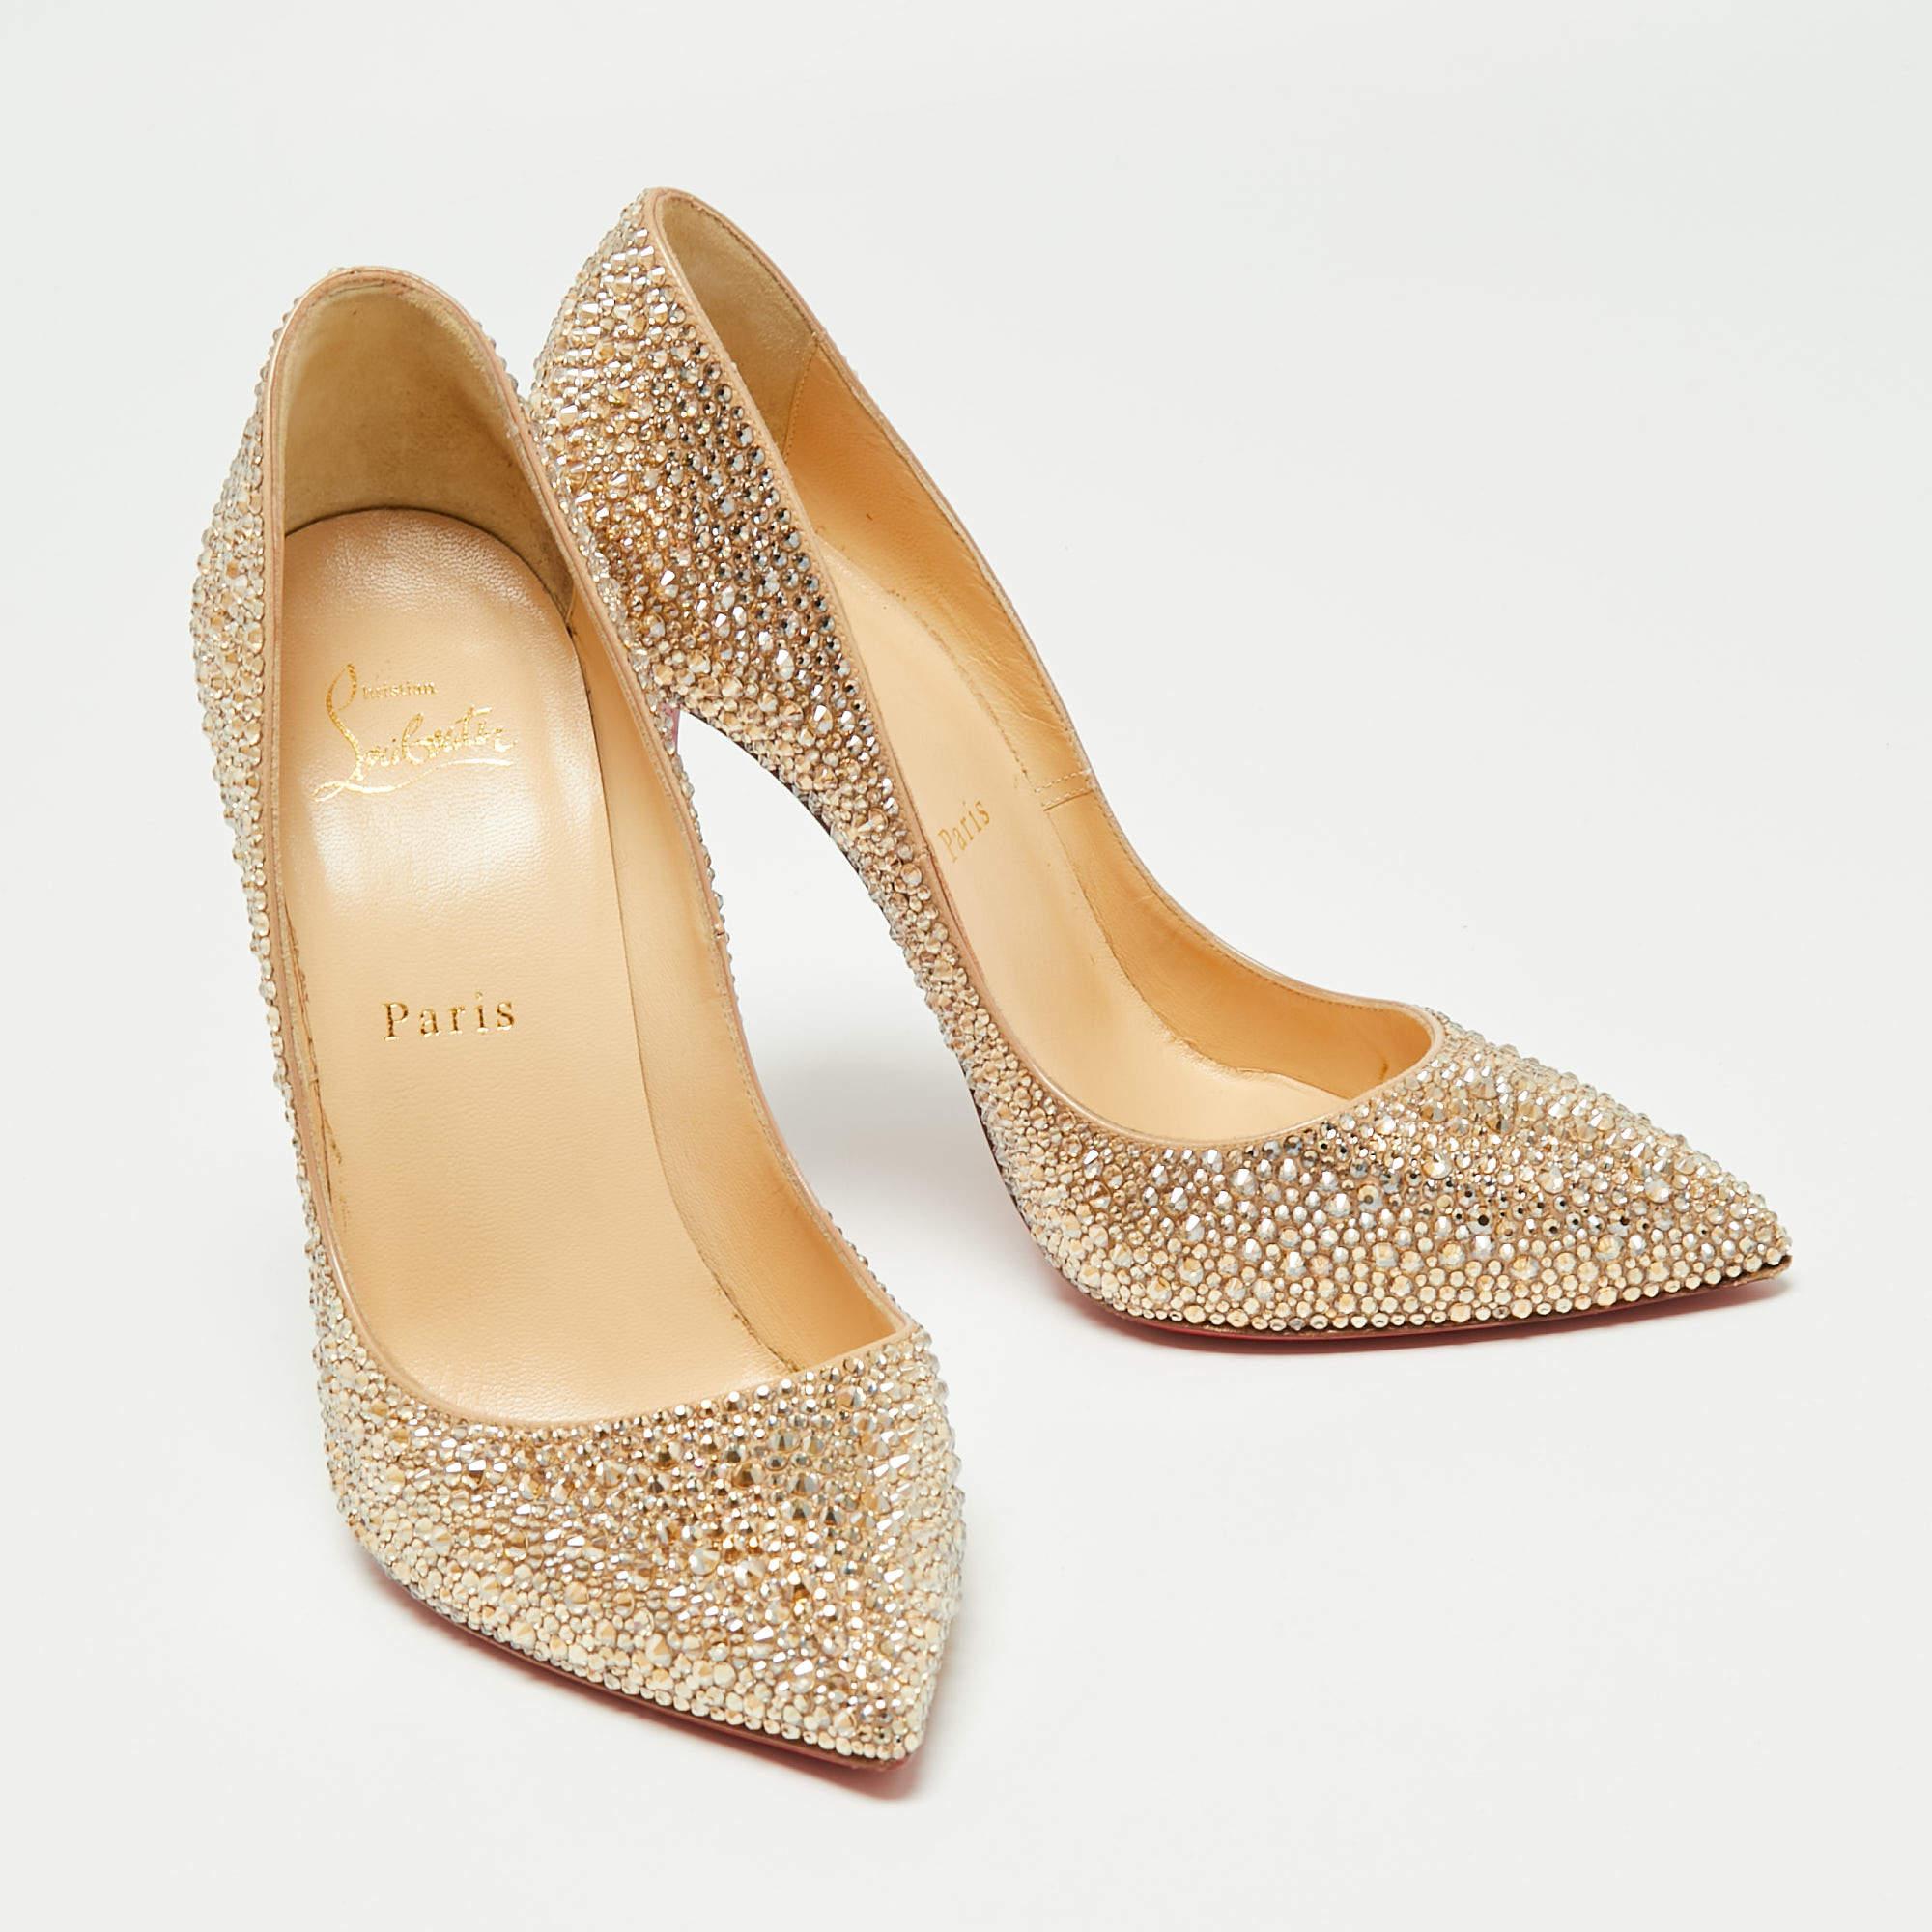 Christian Louboutin Beige Strass 120 Crystal Pigalle Follies Pumps Size 38.5 1